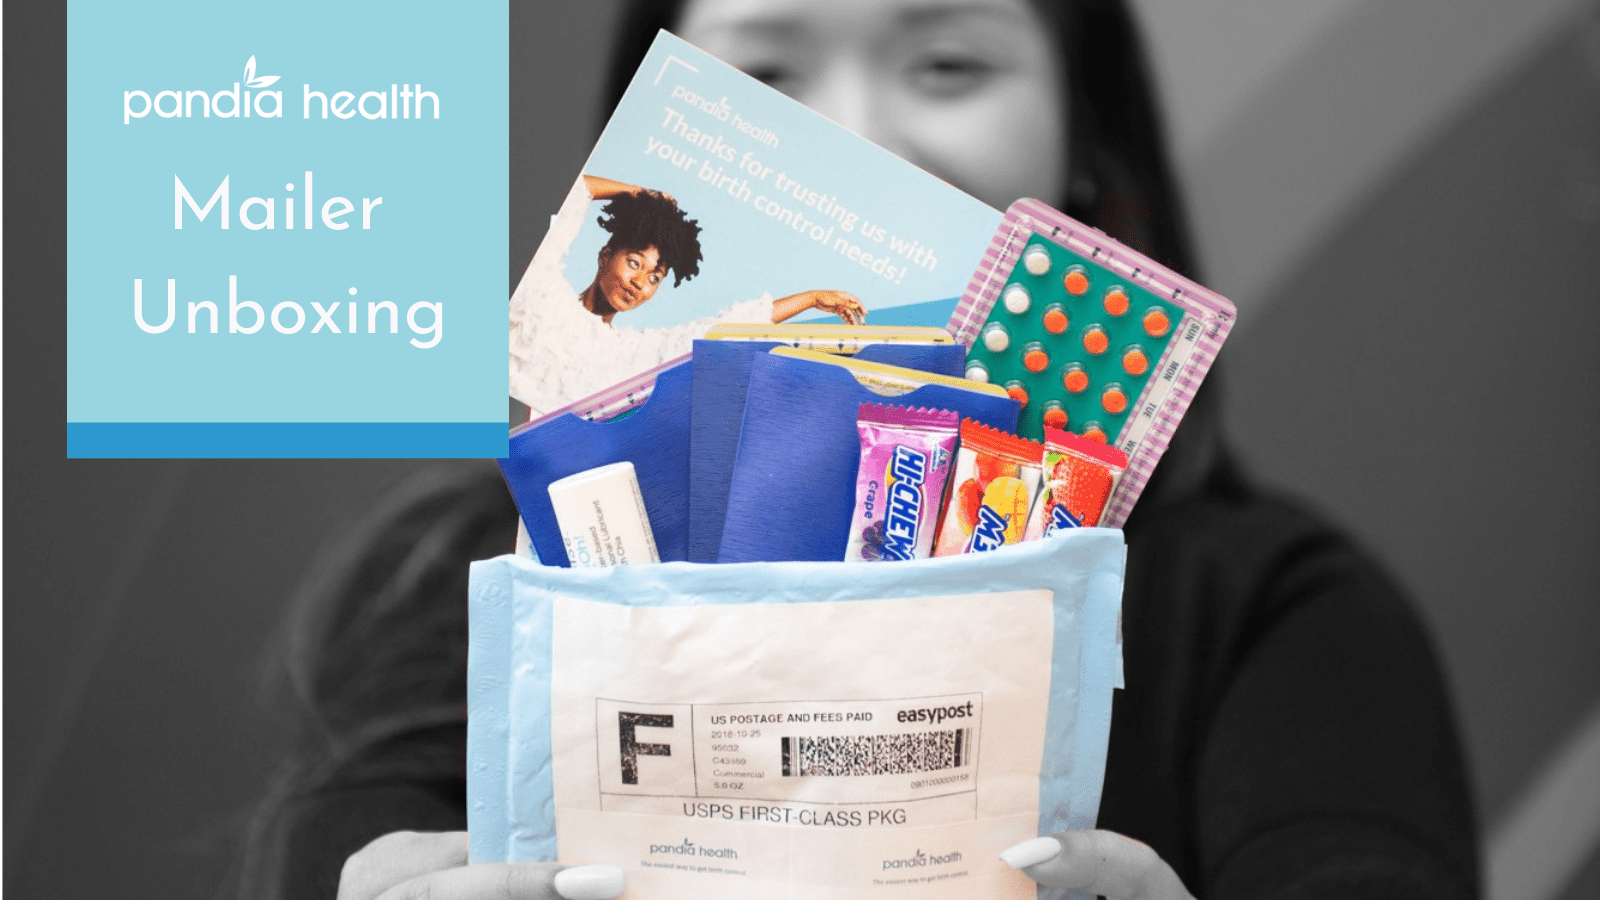 Girl holding Pandia Health mailer, unboxing her birth control and other goodies that come with the package